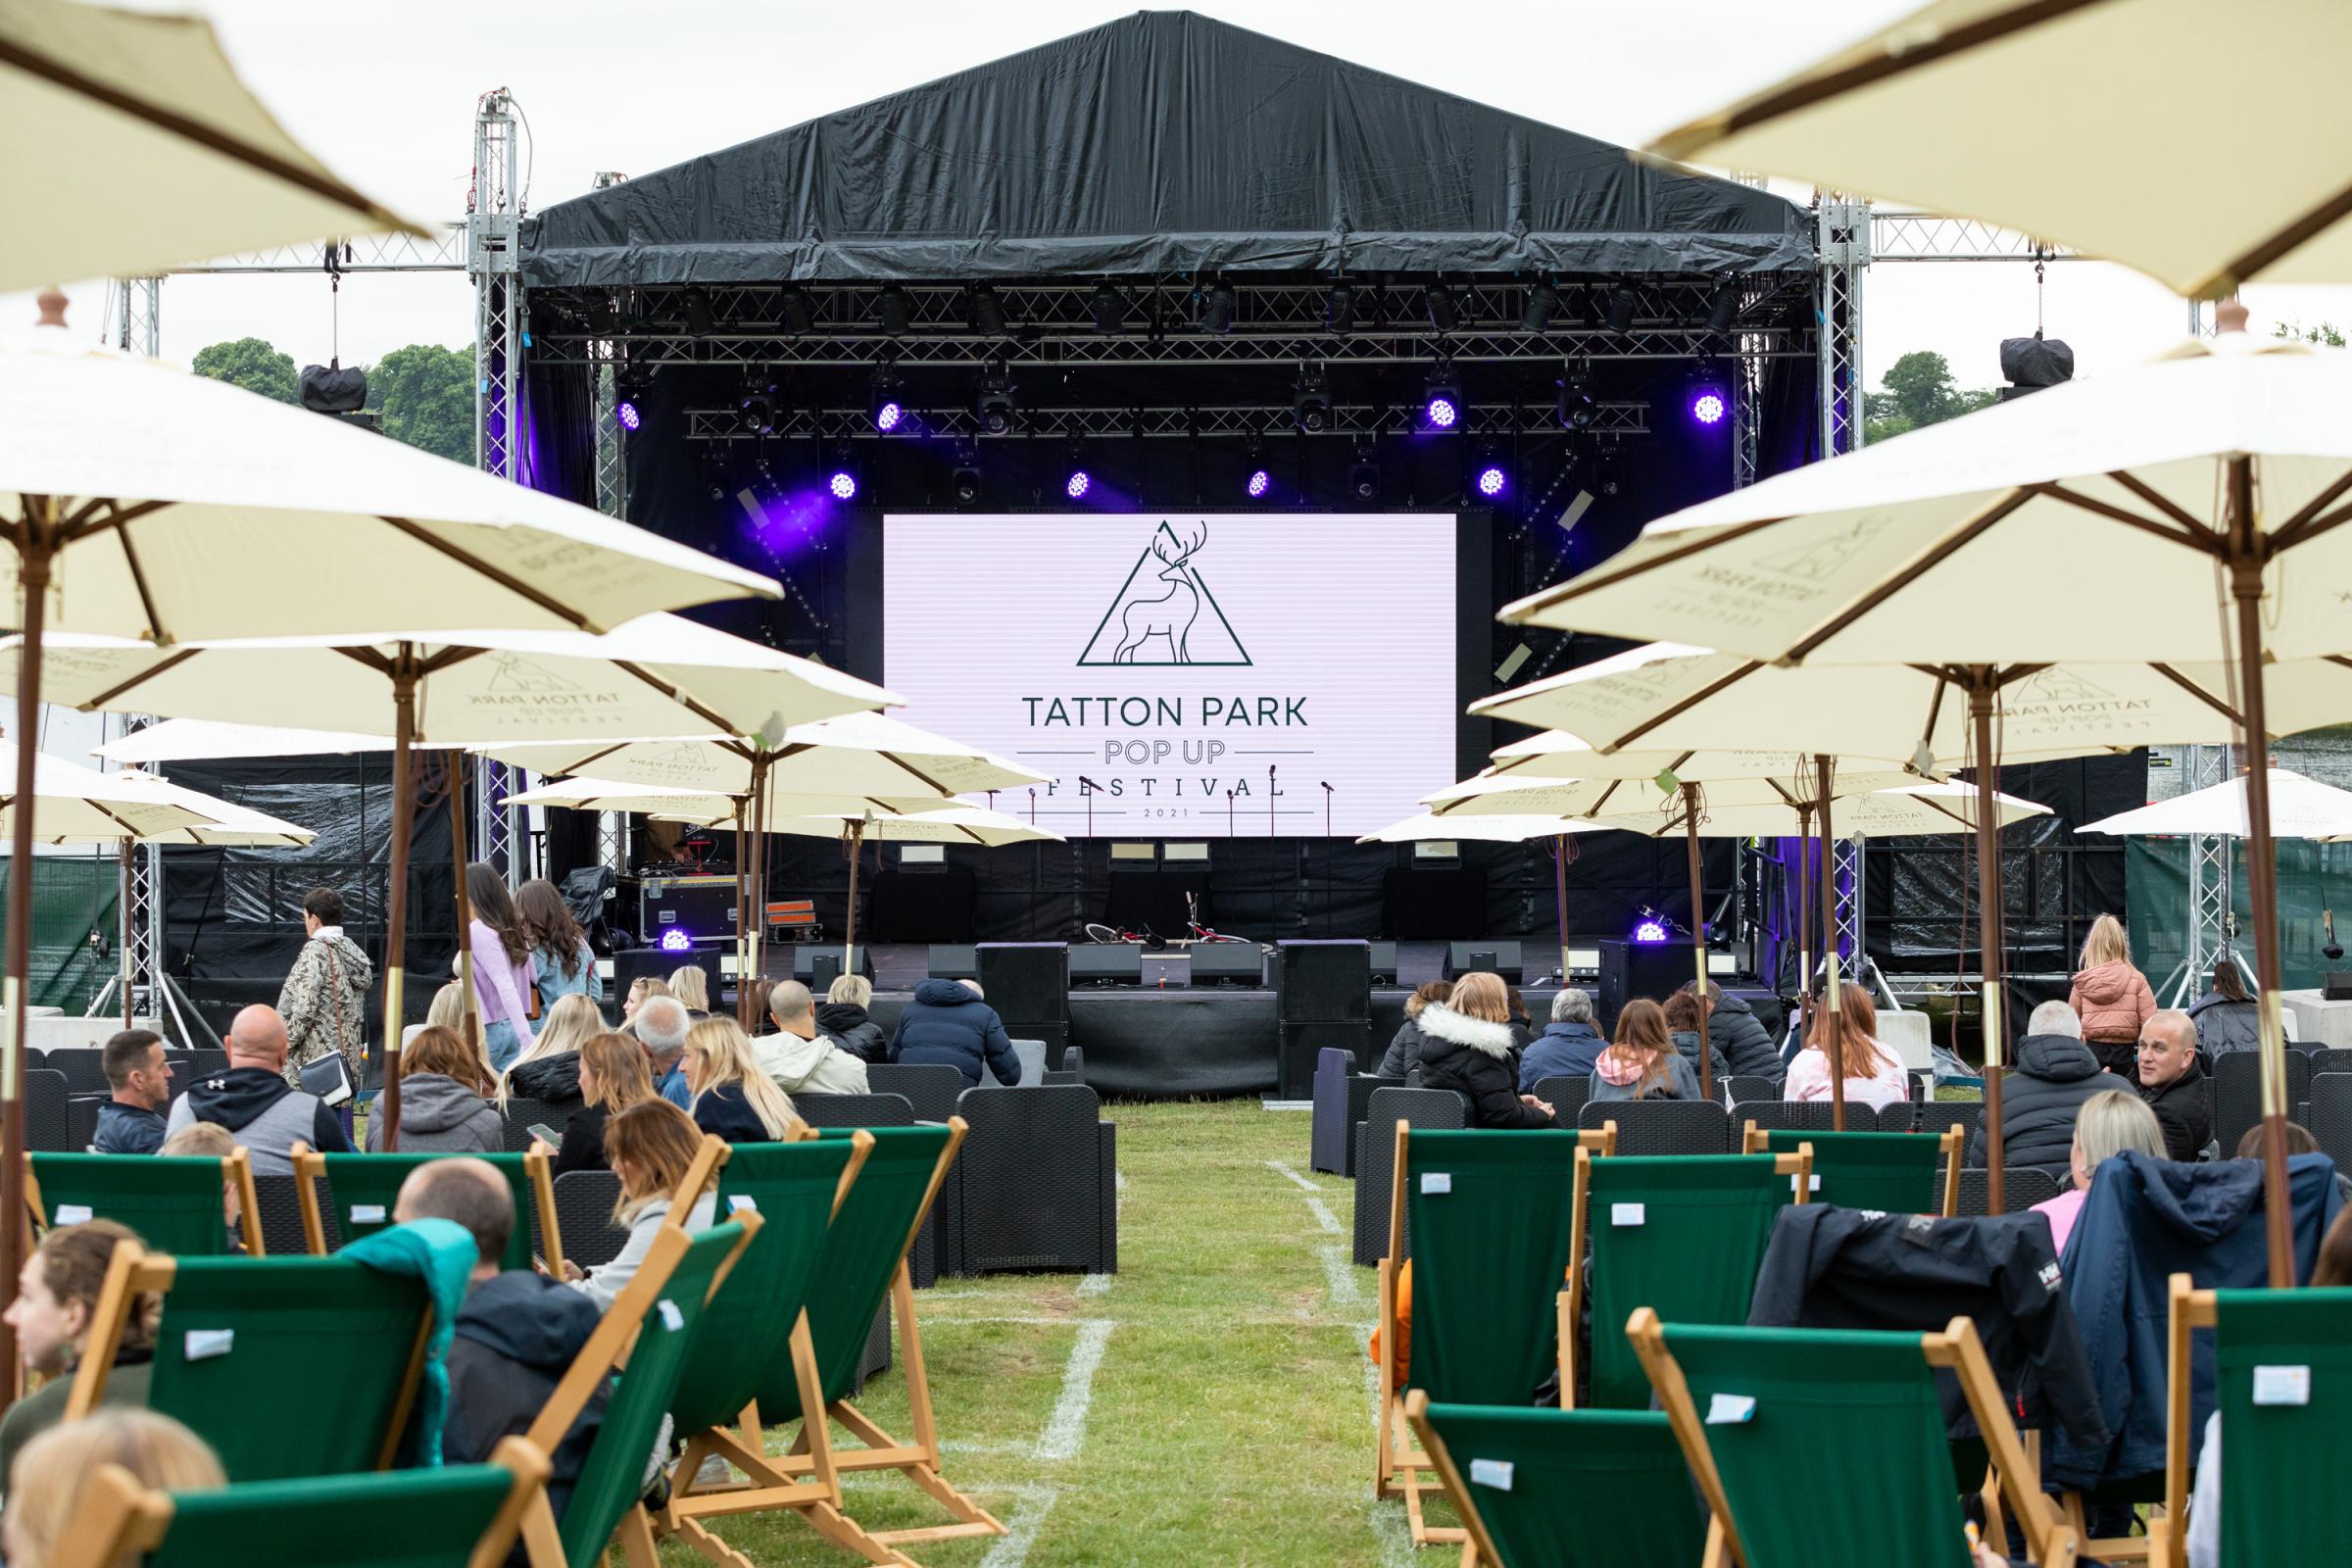 How the stage looks at Tatton Park - Pictures: Carl Sukonik | The Vain Photography